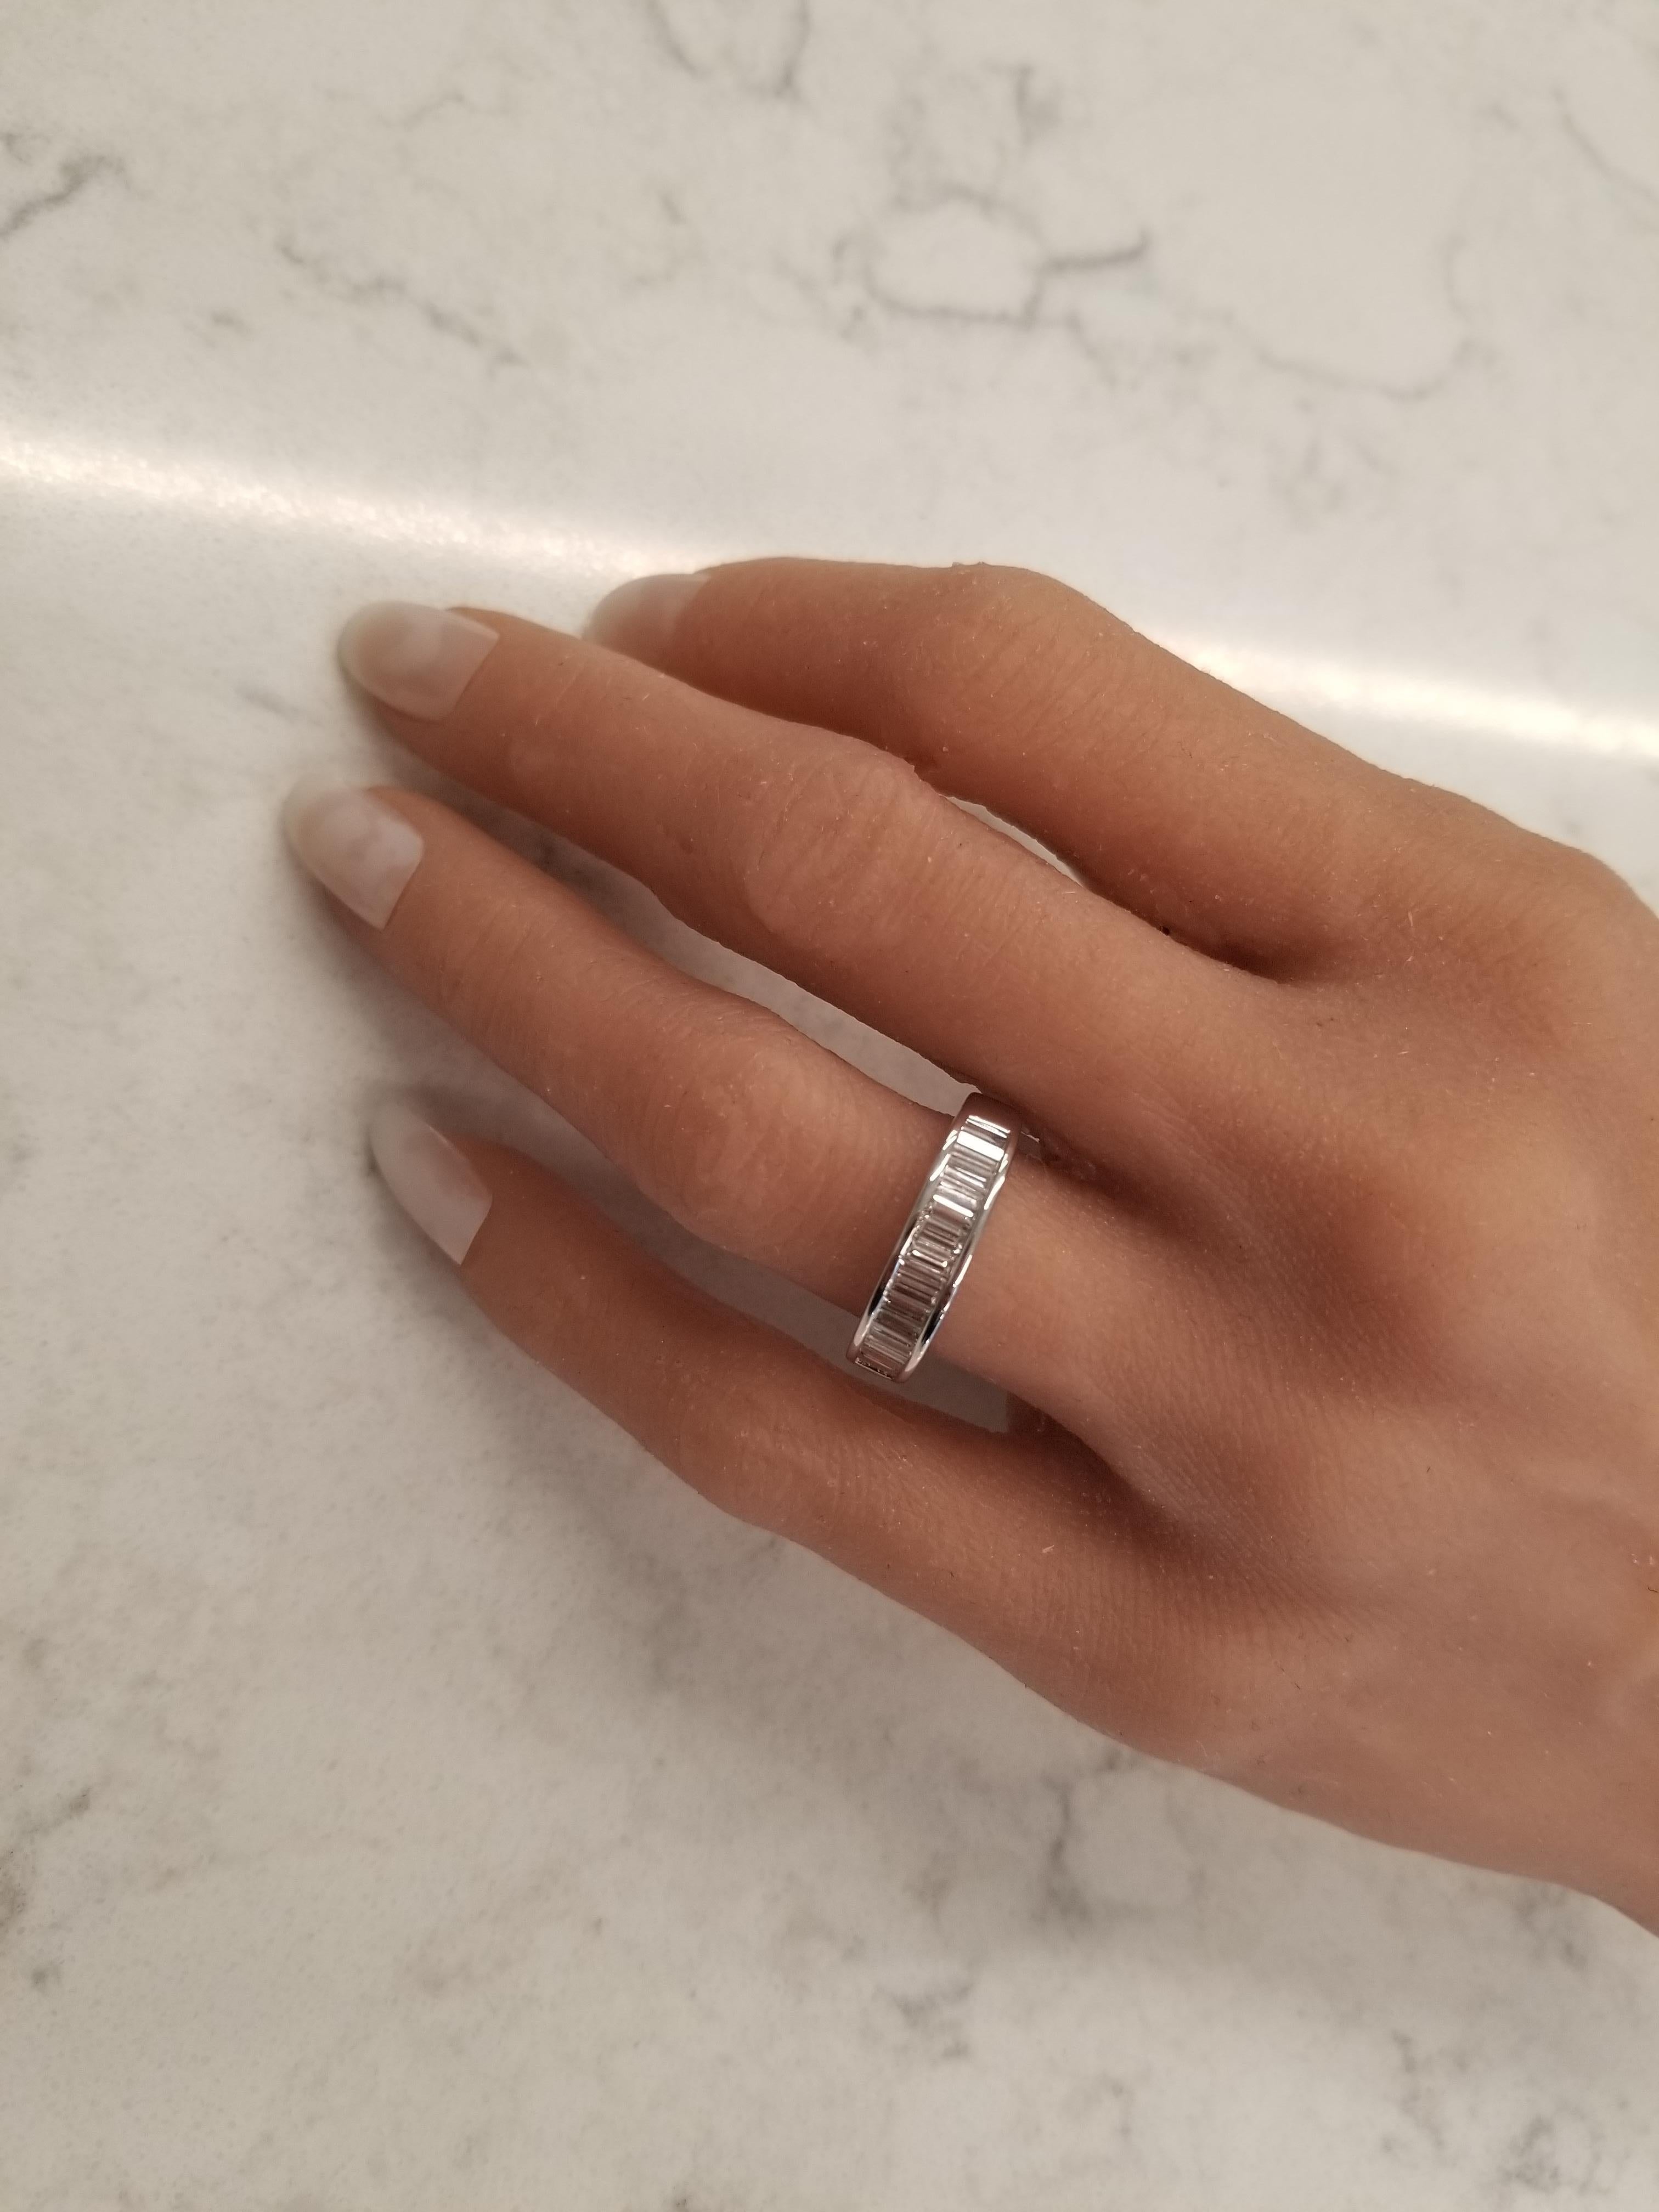 This brightly polished 14 karat white gold diamond wedding stackable ring exudes ultimate style and prestige with its incredible sparkle and fire. A total of 0.75carats of 20 shimmering baguette cut diamonds are arranged in a stunning row along the